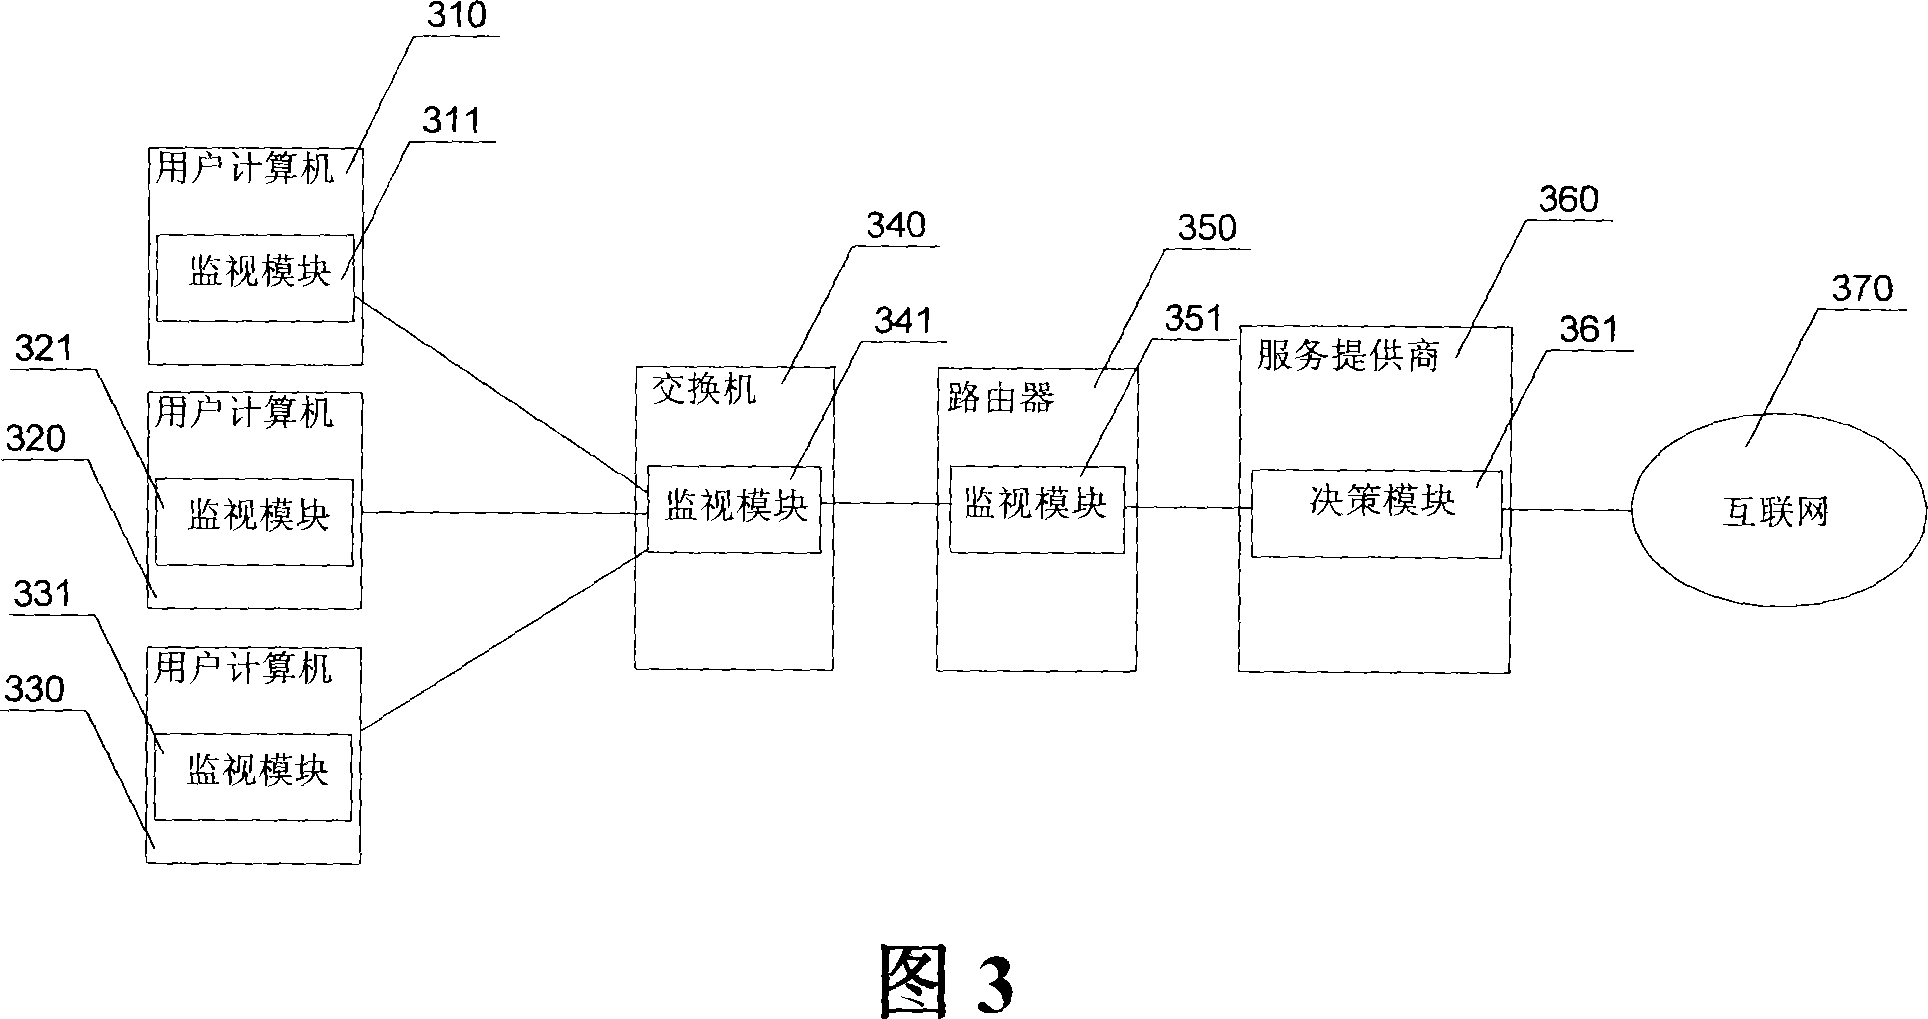 Dynamic multilevel service quality assurance dispatching system and method